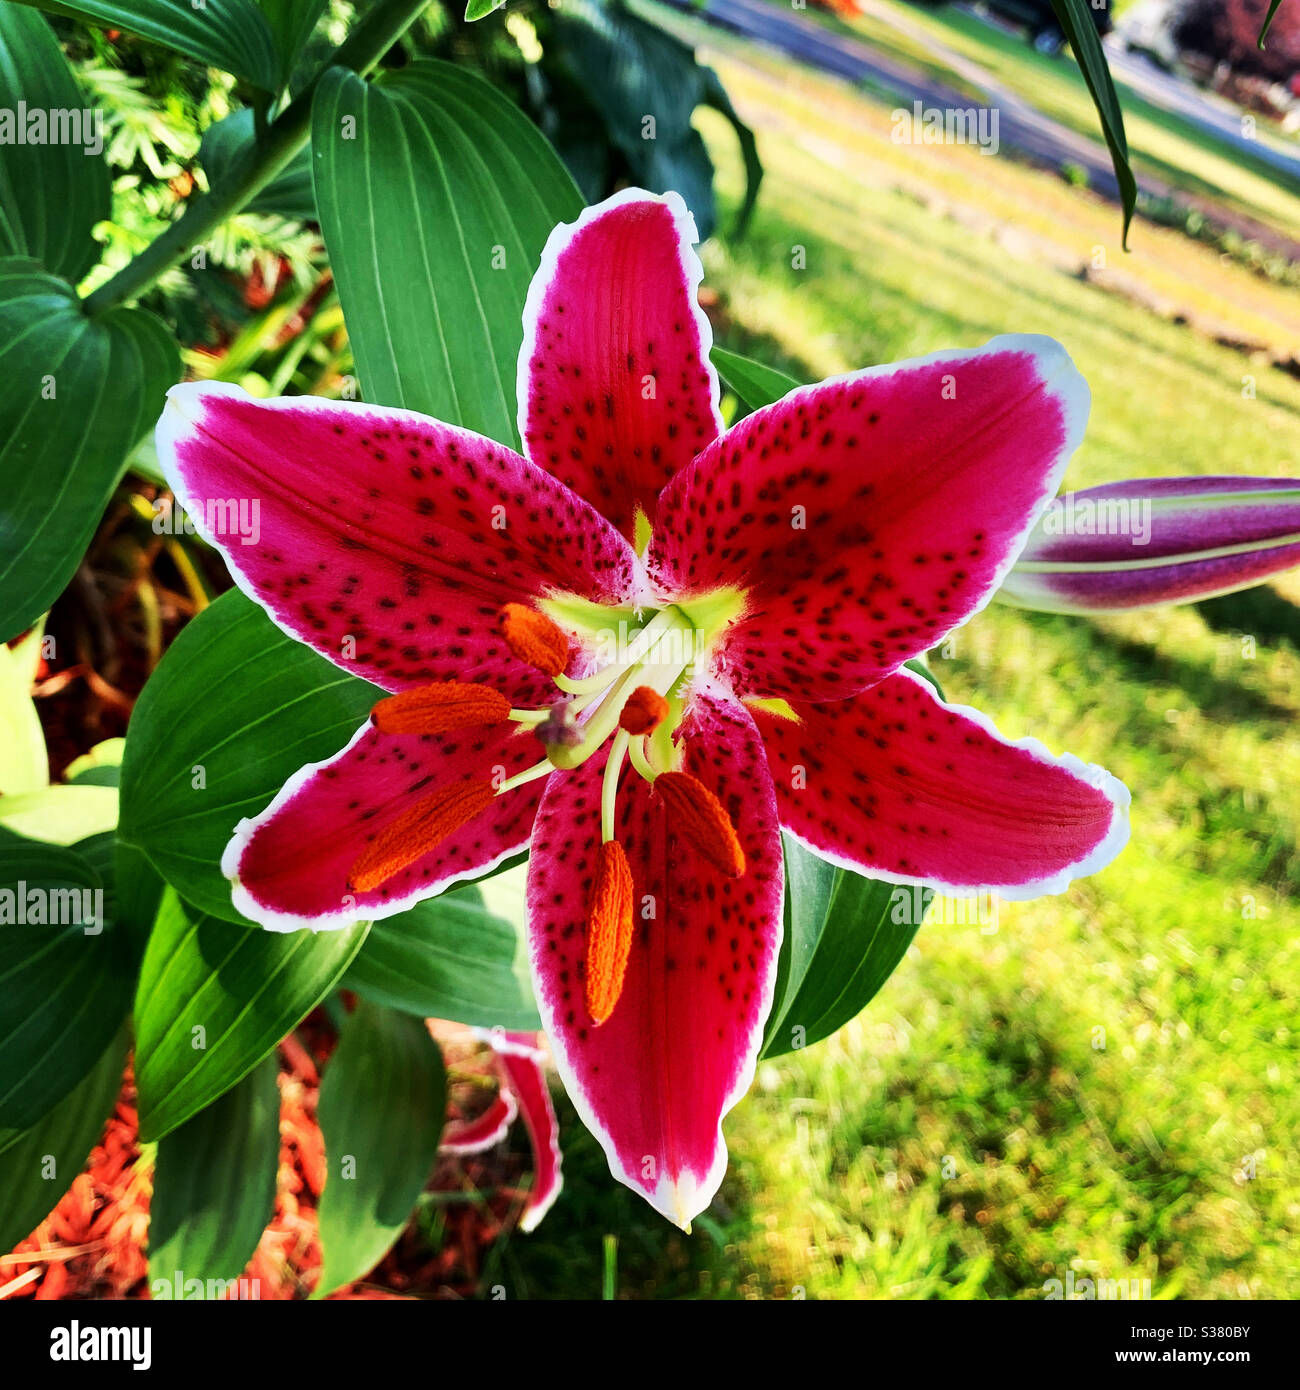 Bright pink stargazer Lily in bloom Stock Photo